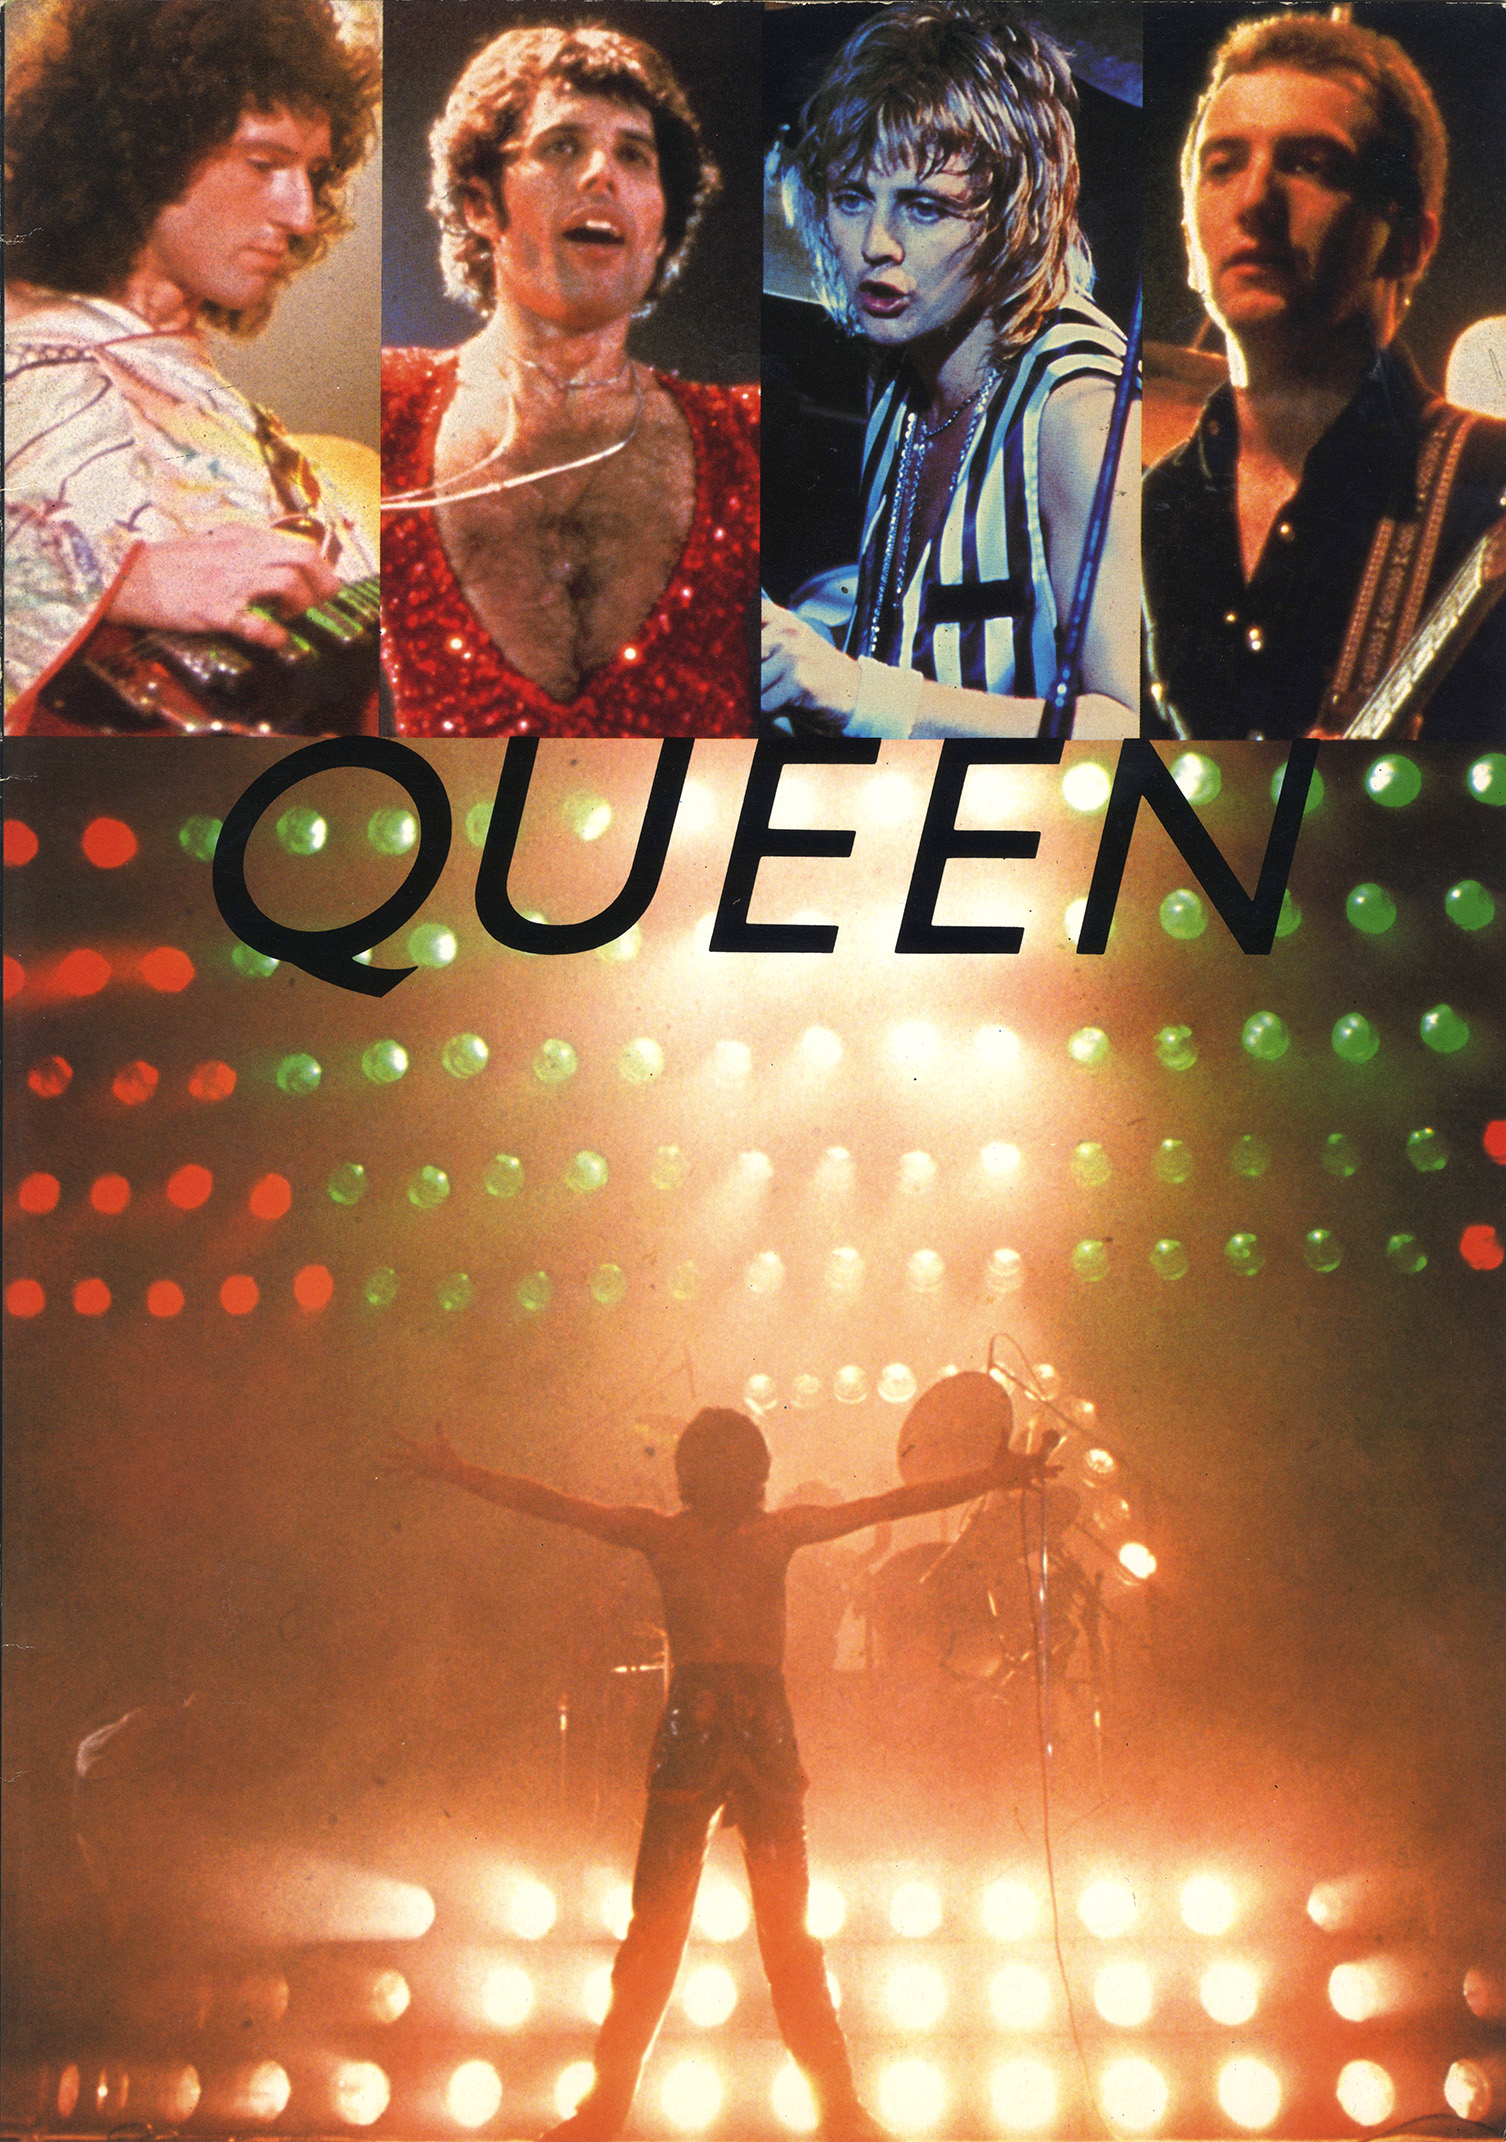 Tour programs from Queen tours (with Freddie) [QueenConcerts]